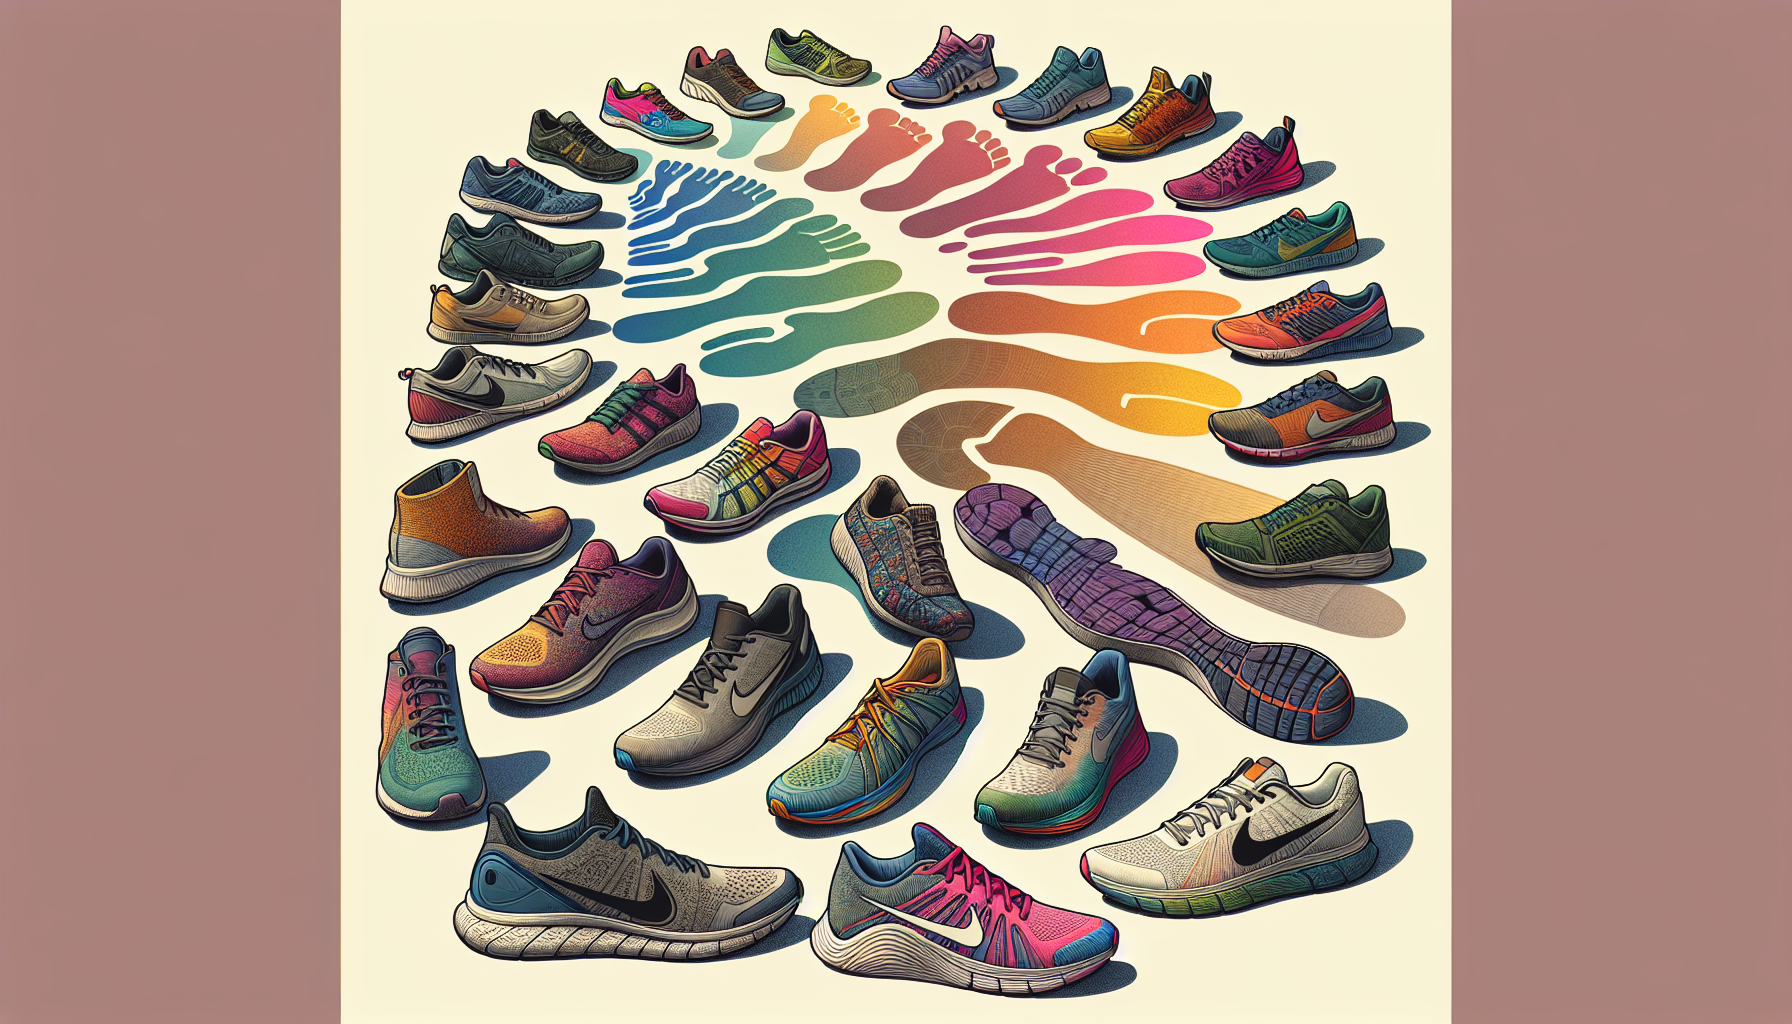 Choosing the right running shoes for physical fitness